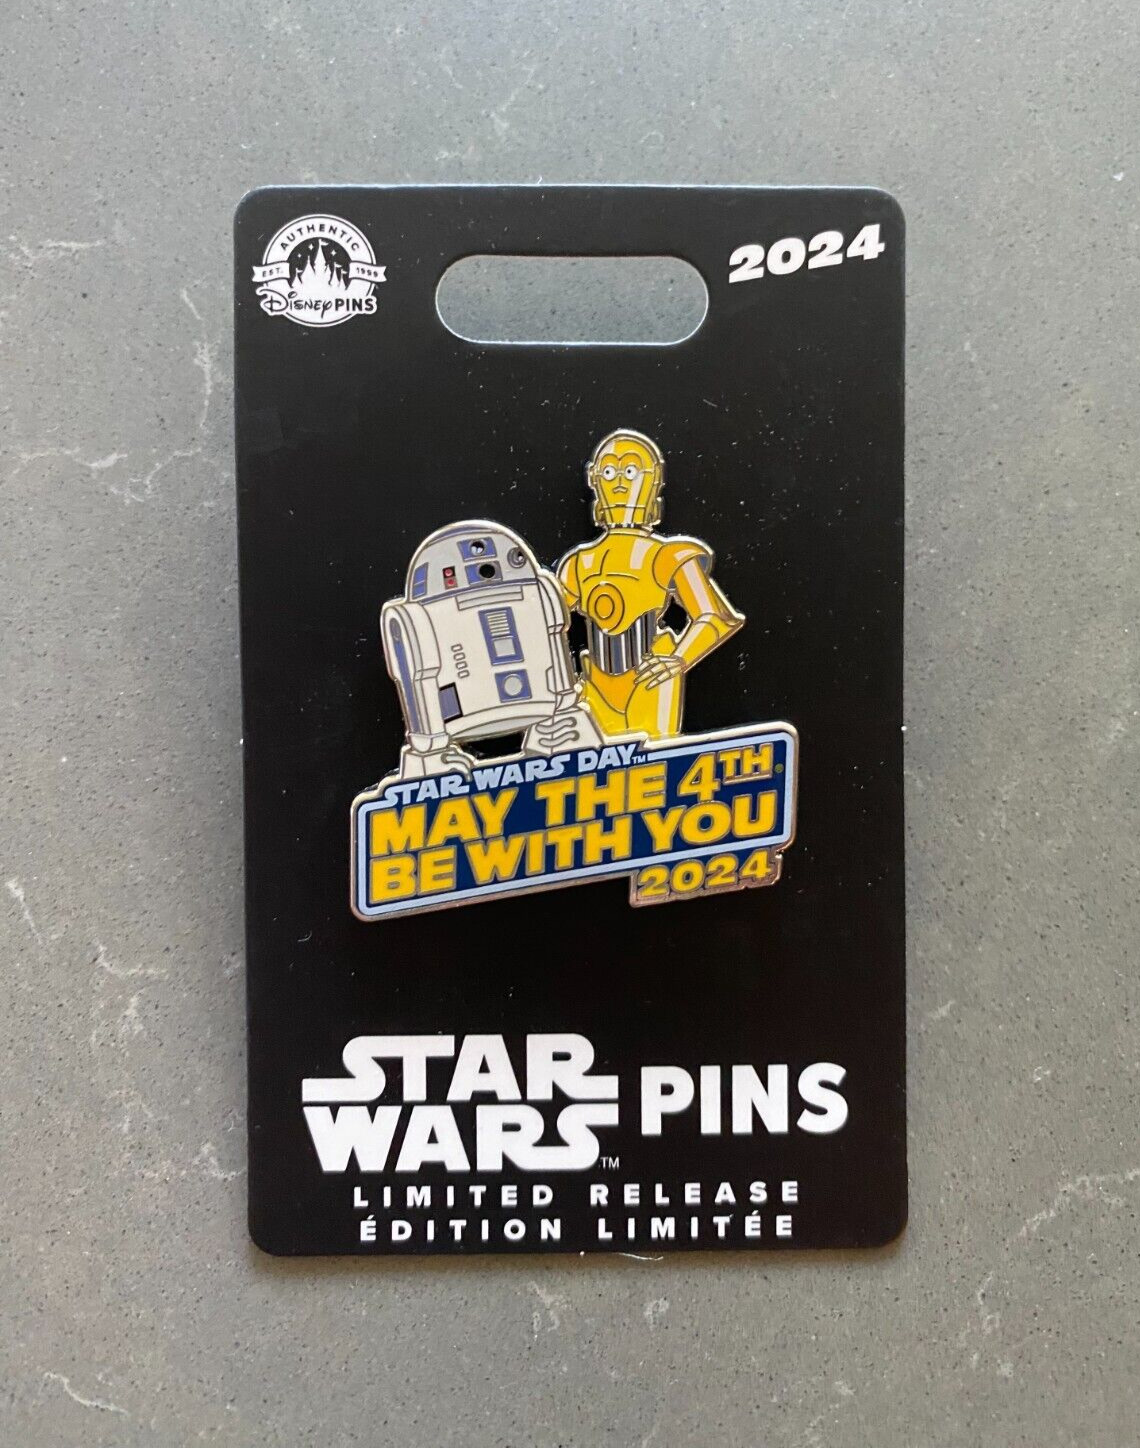 2024 DISNEY PARKS STAR WARS R2-D2 & C-3PO MAY THE 4TH BE WITH YOU PIN LR